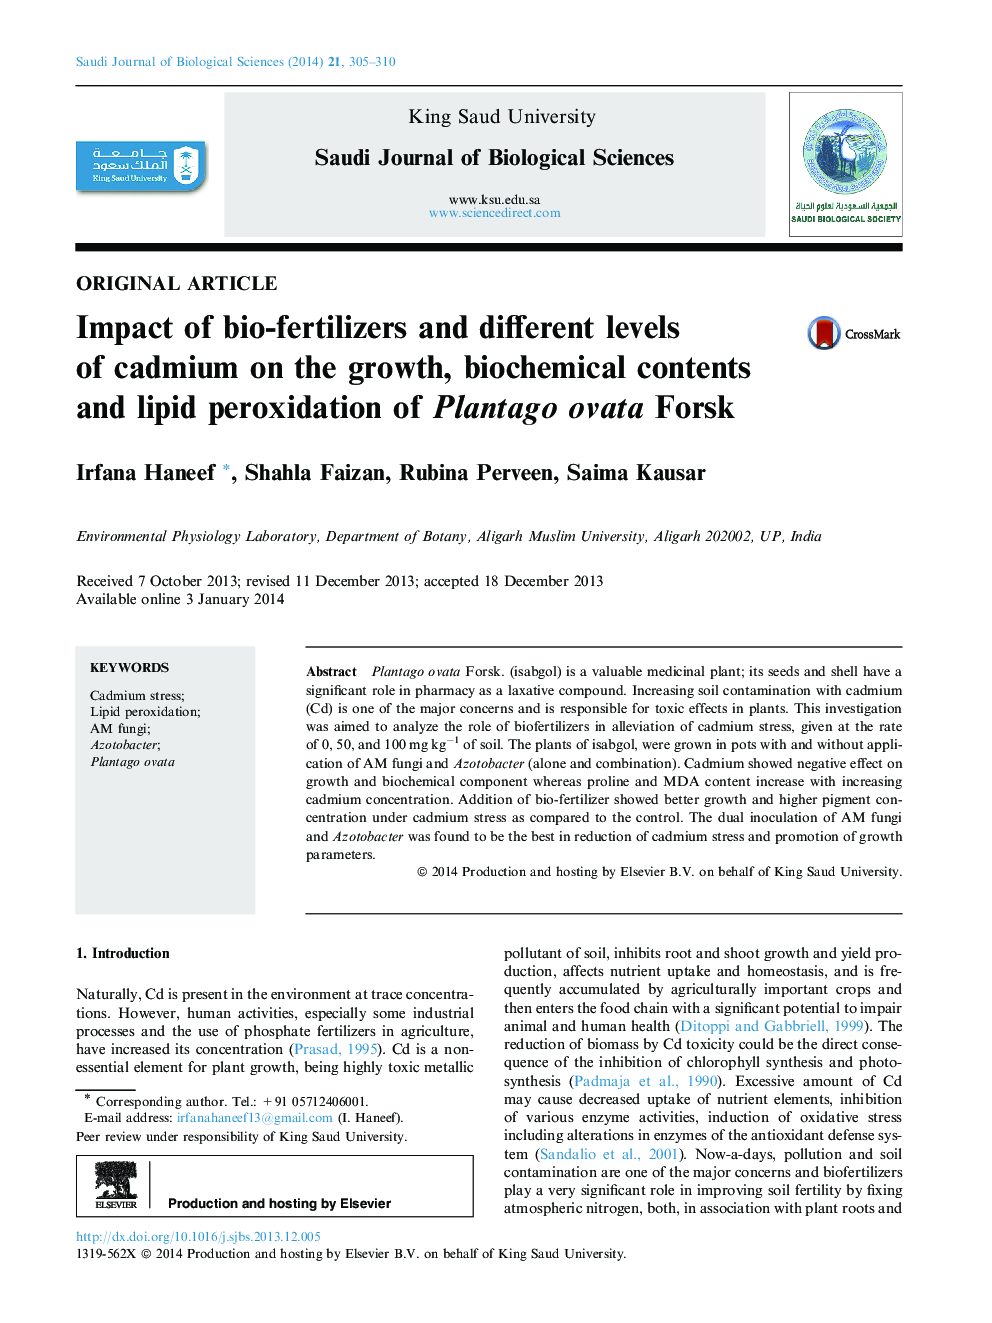 Impact of bio-fertilizers and different levels of cadmium on the growth, biochemical contents and lipid peroxidation of Plantago ovata Forsk 